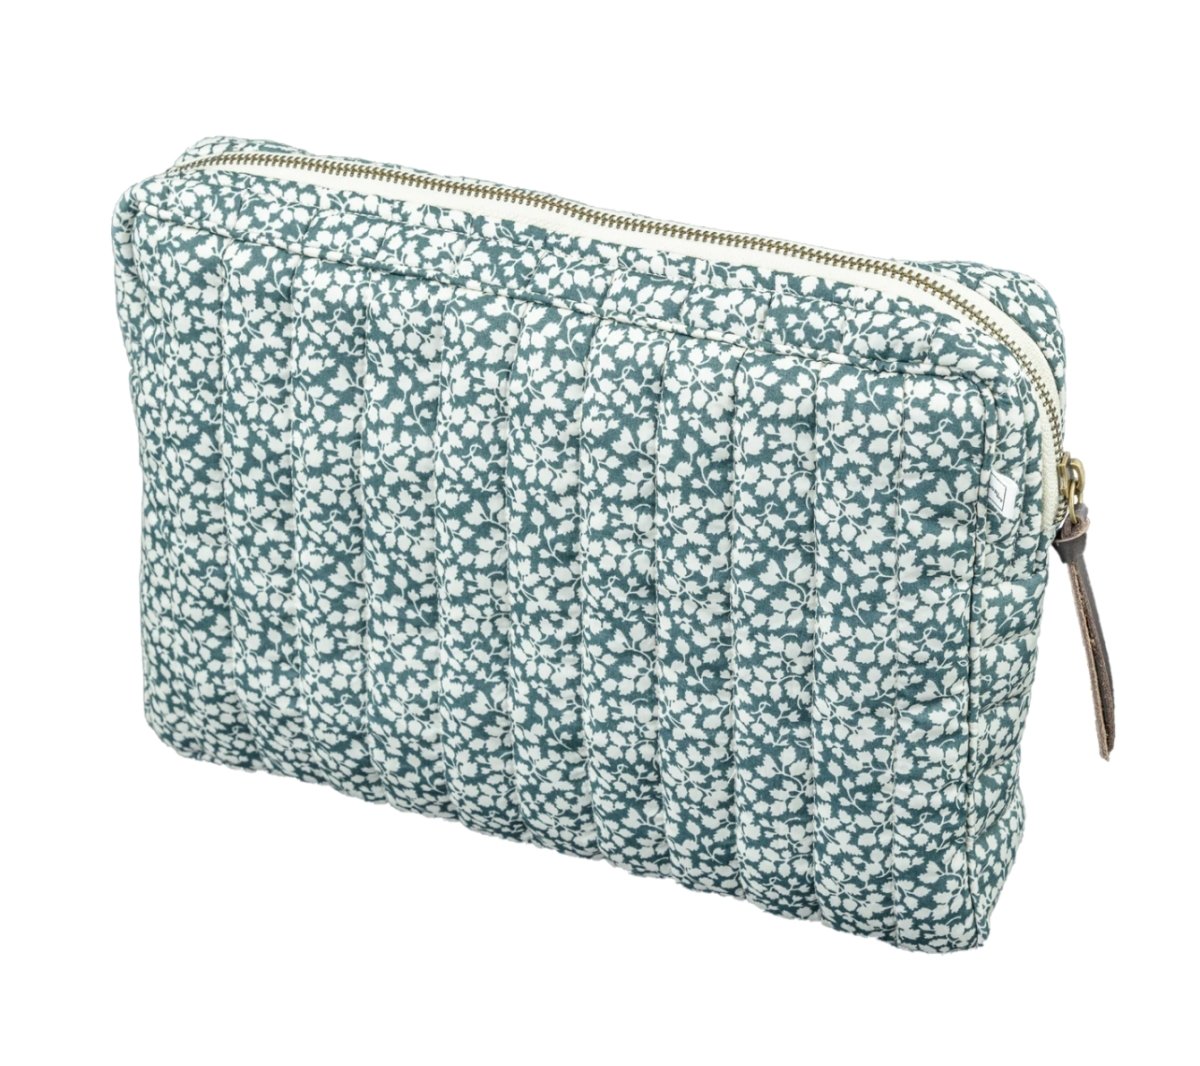 Pouch Big Liberty Fabric - Homebody Denver